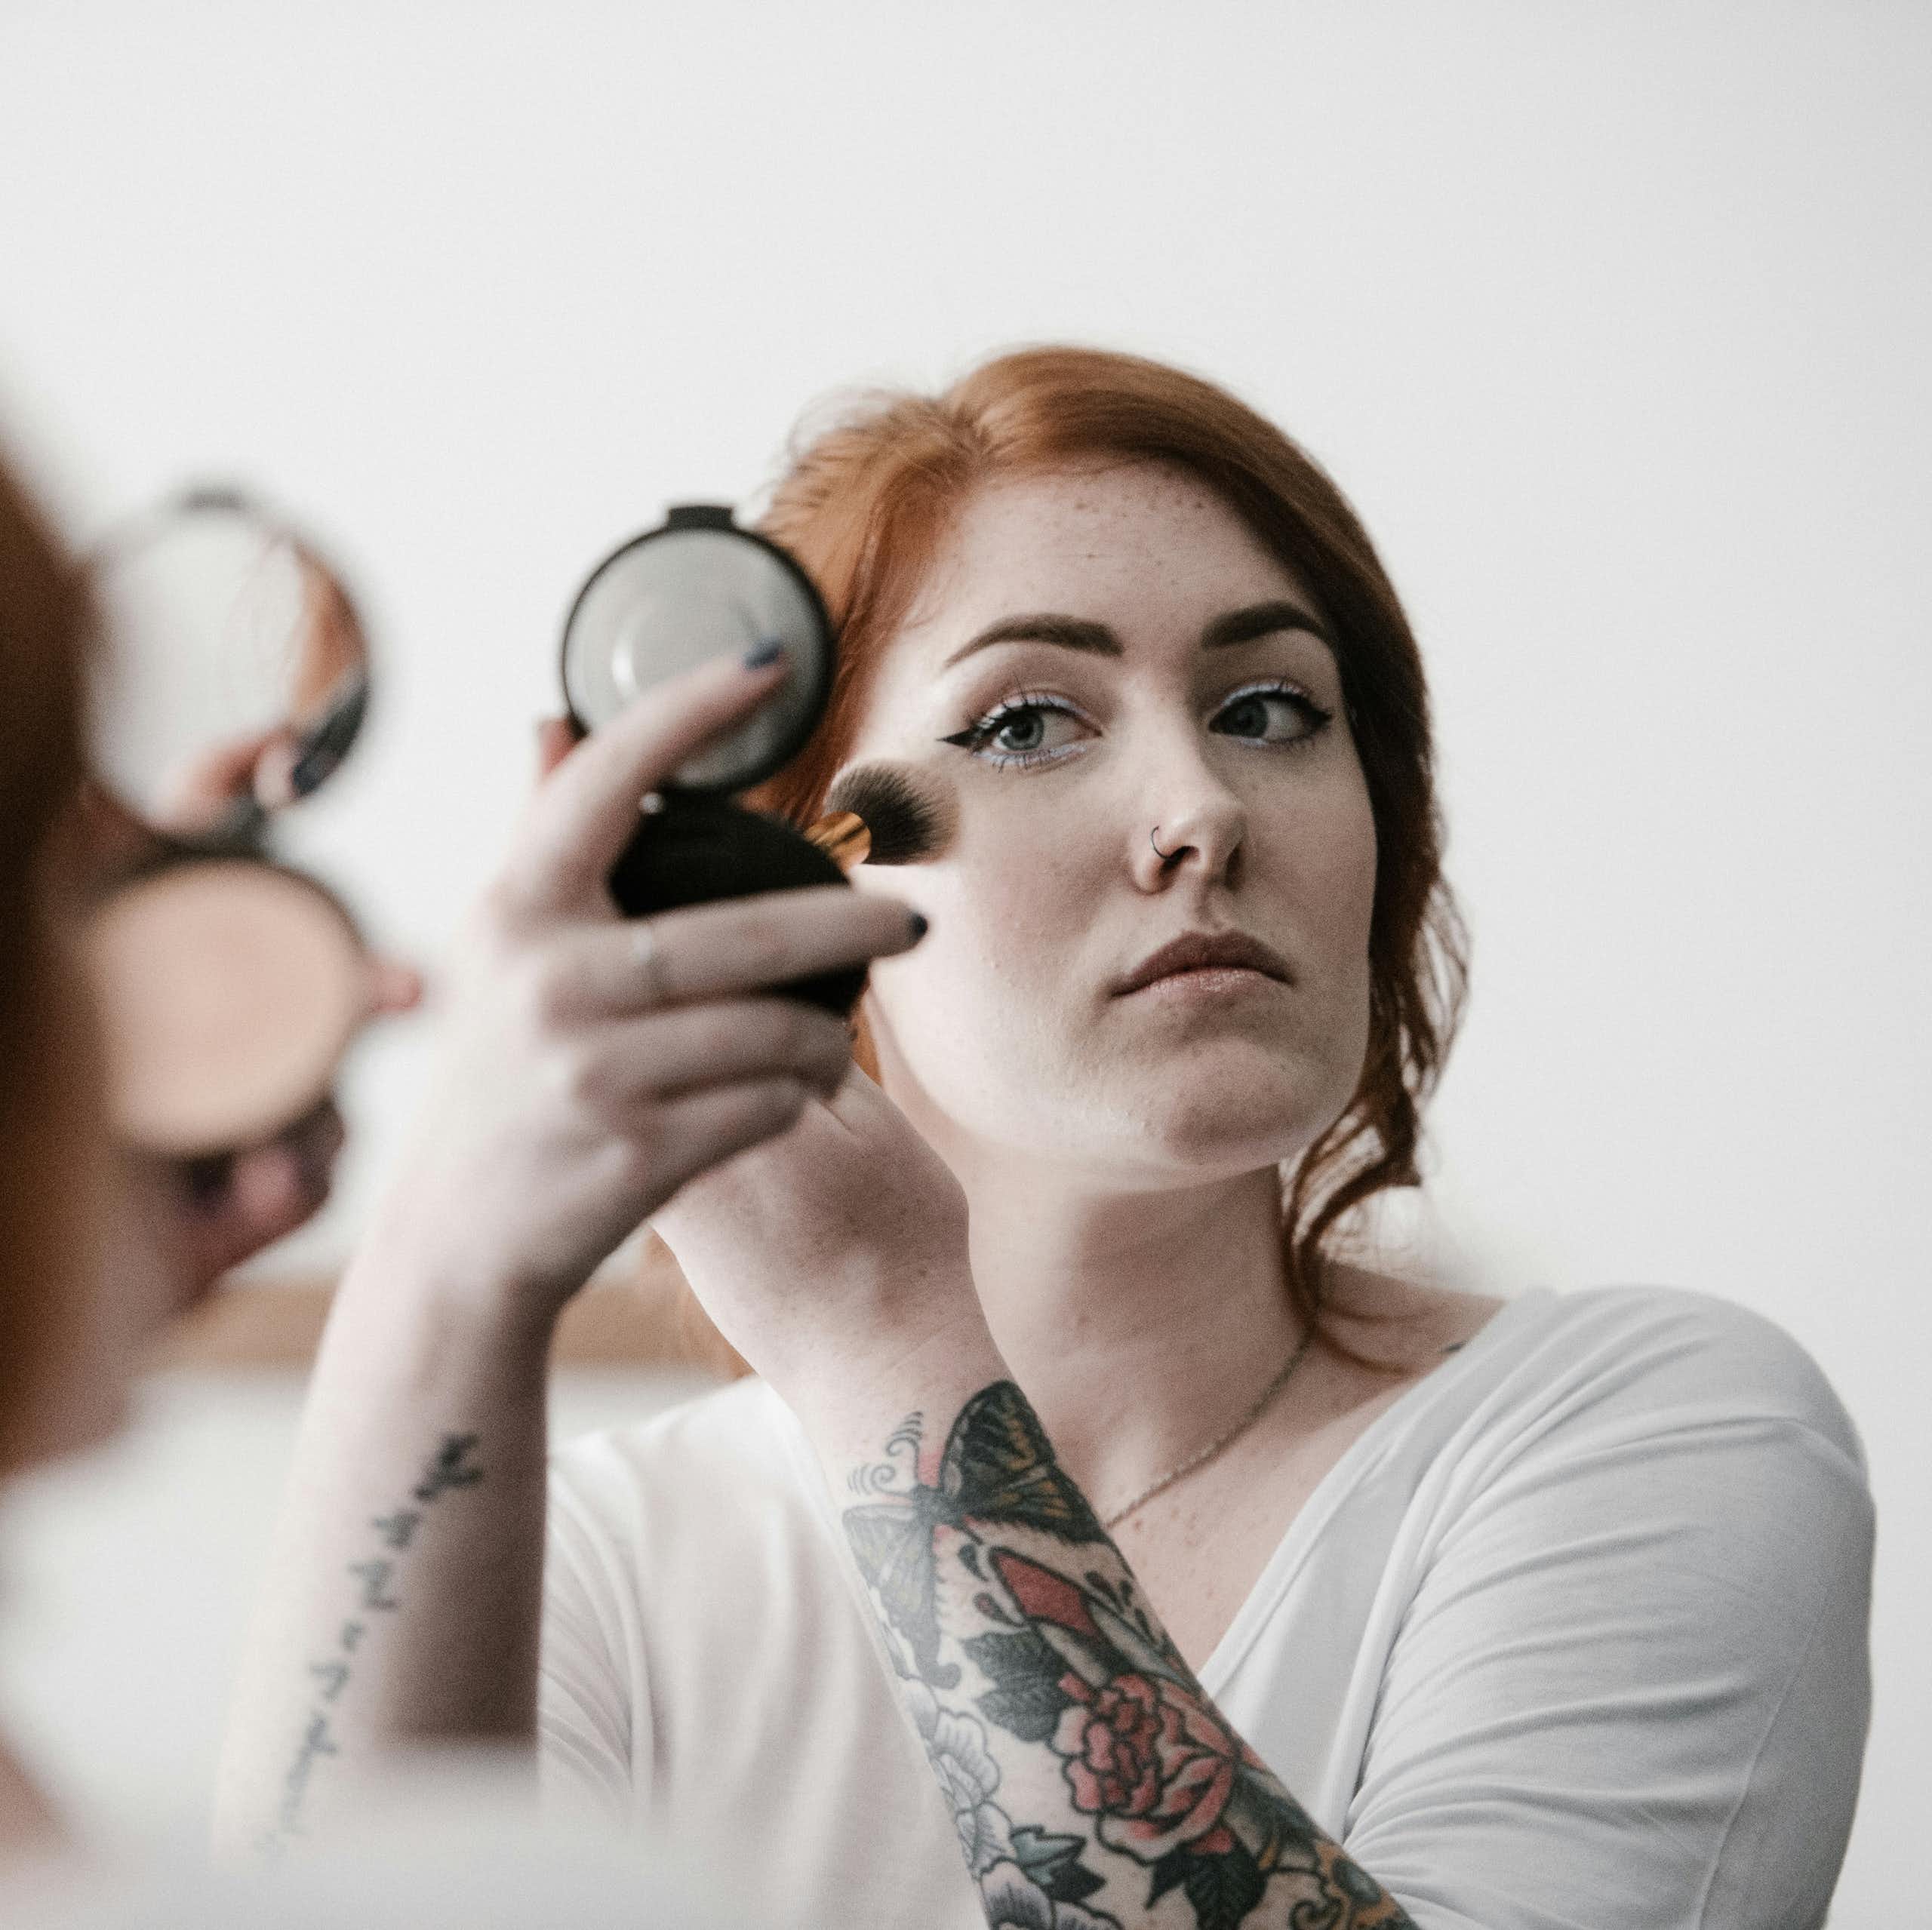 A redhaired woman applies makeup while looking in a compact mirror.